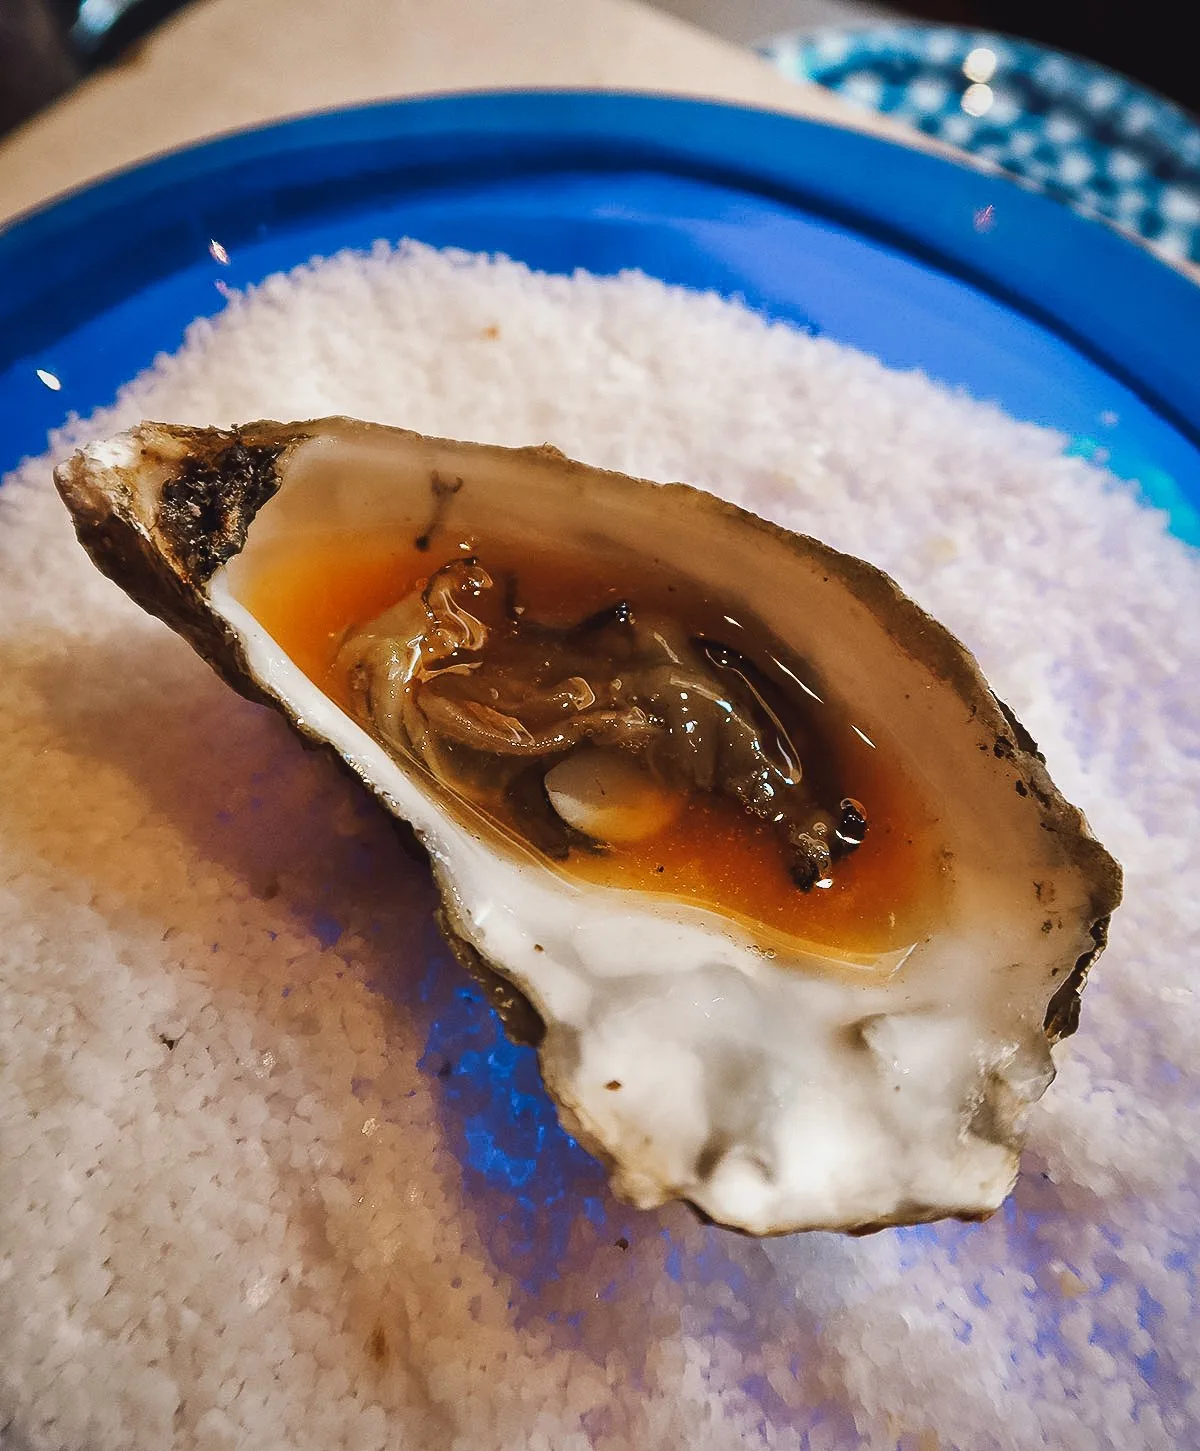 Oyster at a restaurant in Seville